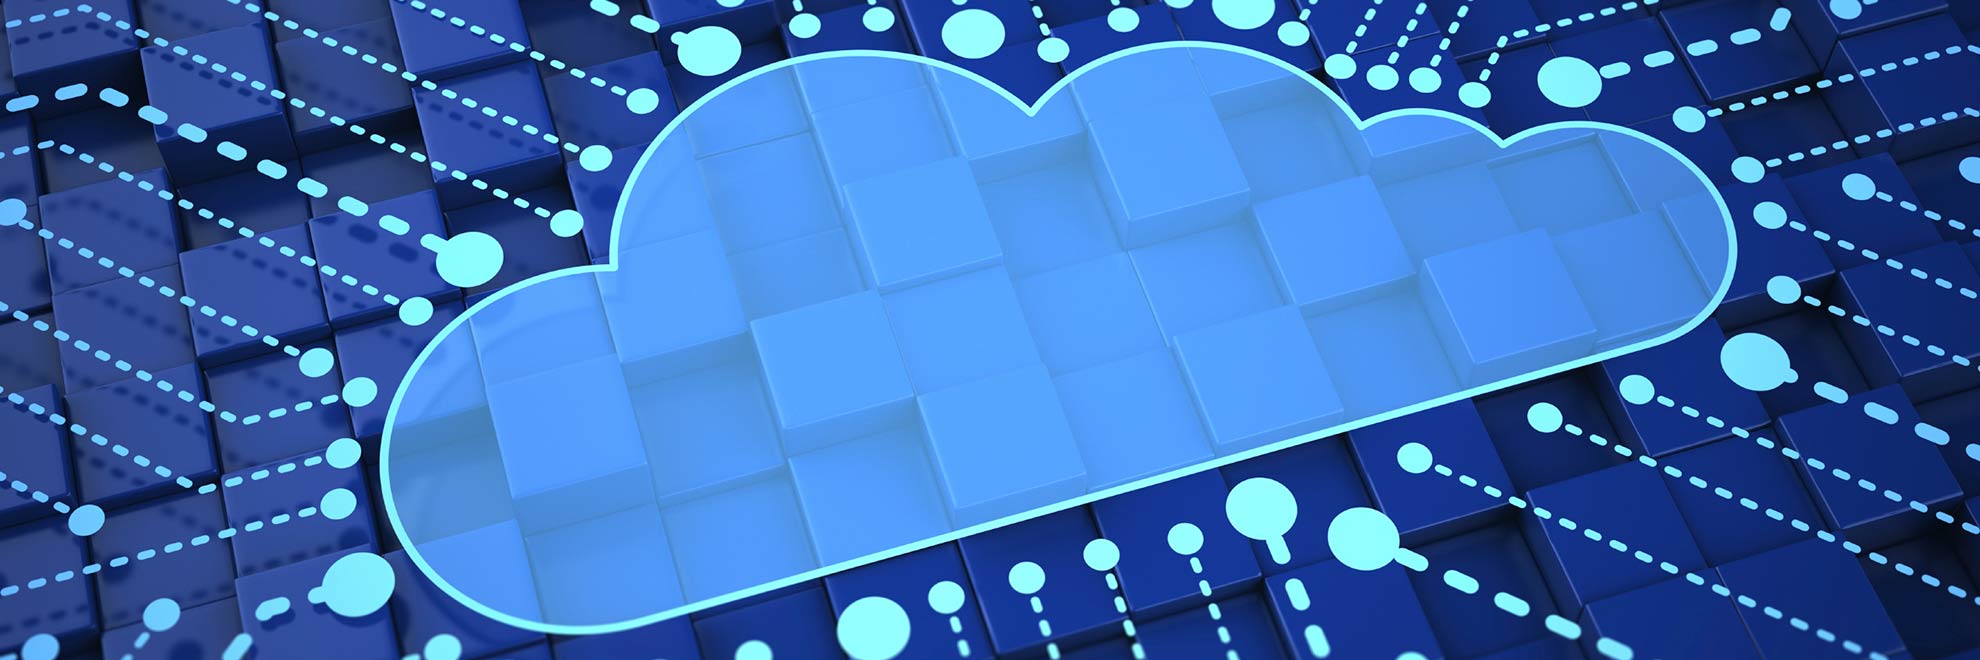 Business demands for agility and innovation prompt rise of cloud native applications: adoption is set to double by 2020